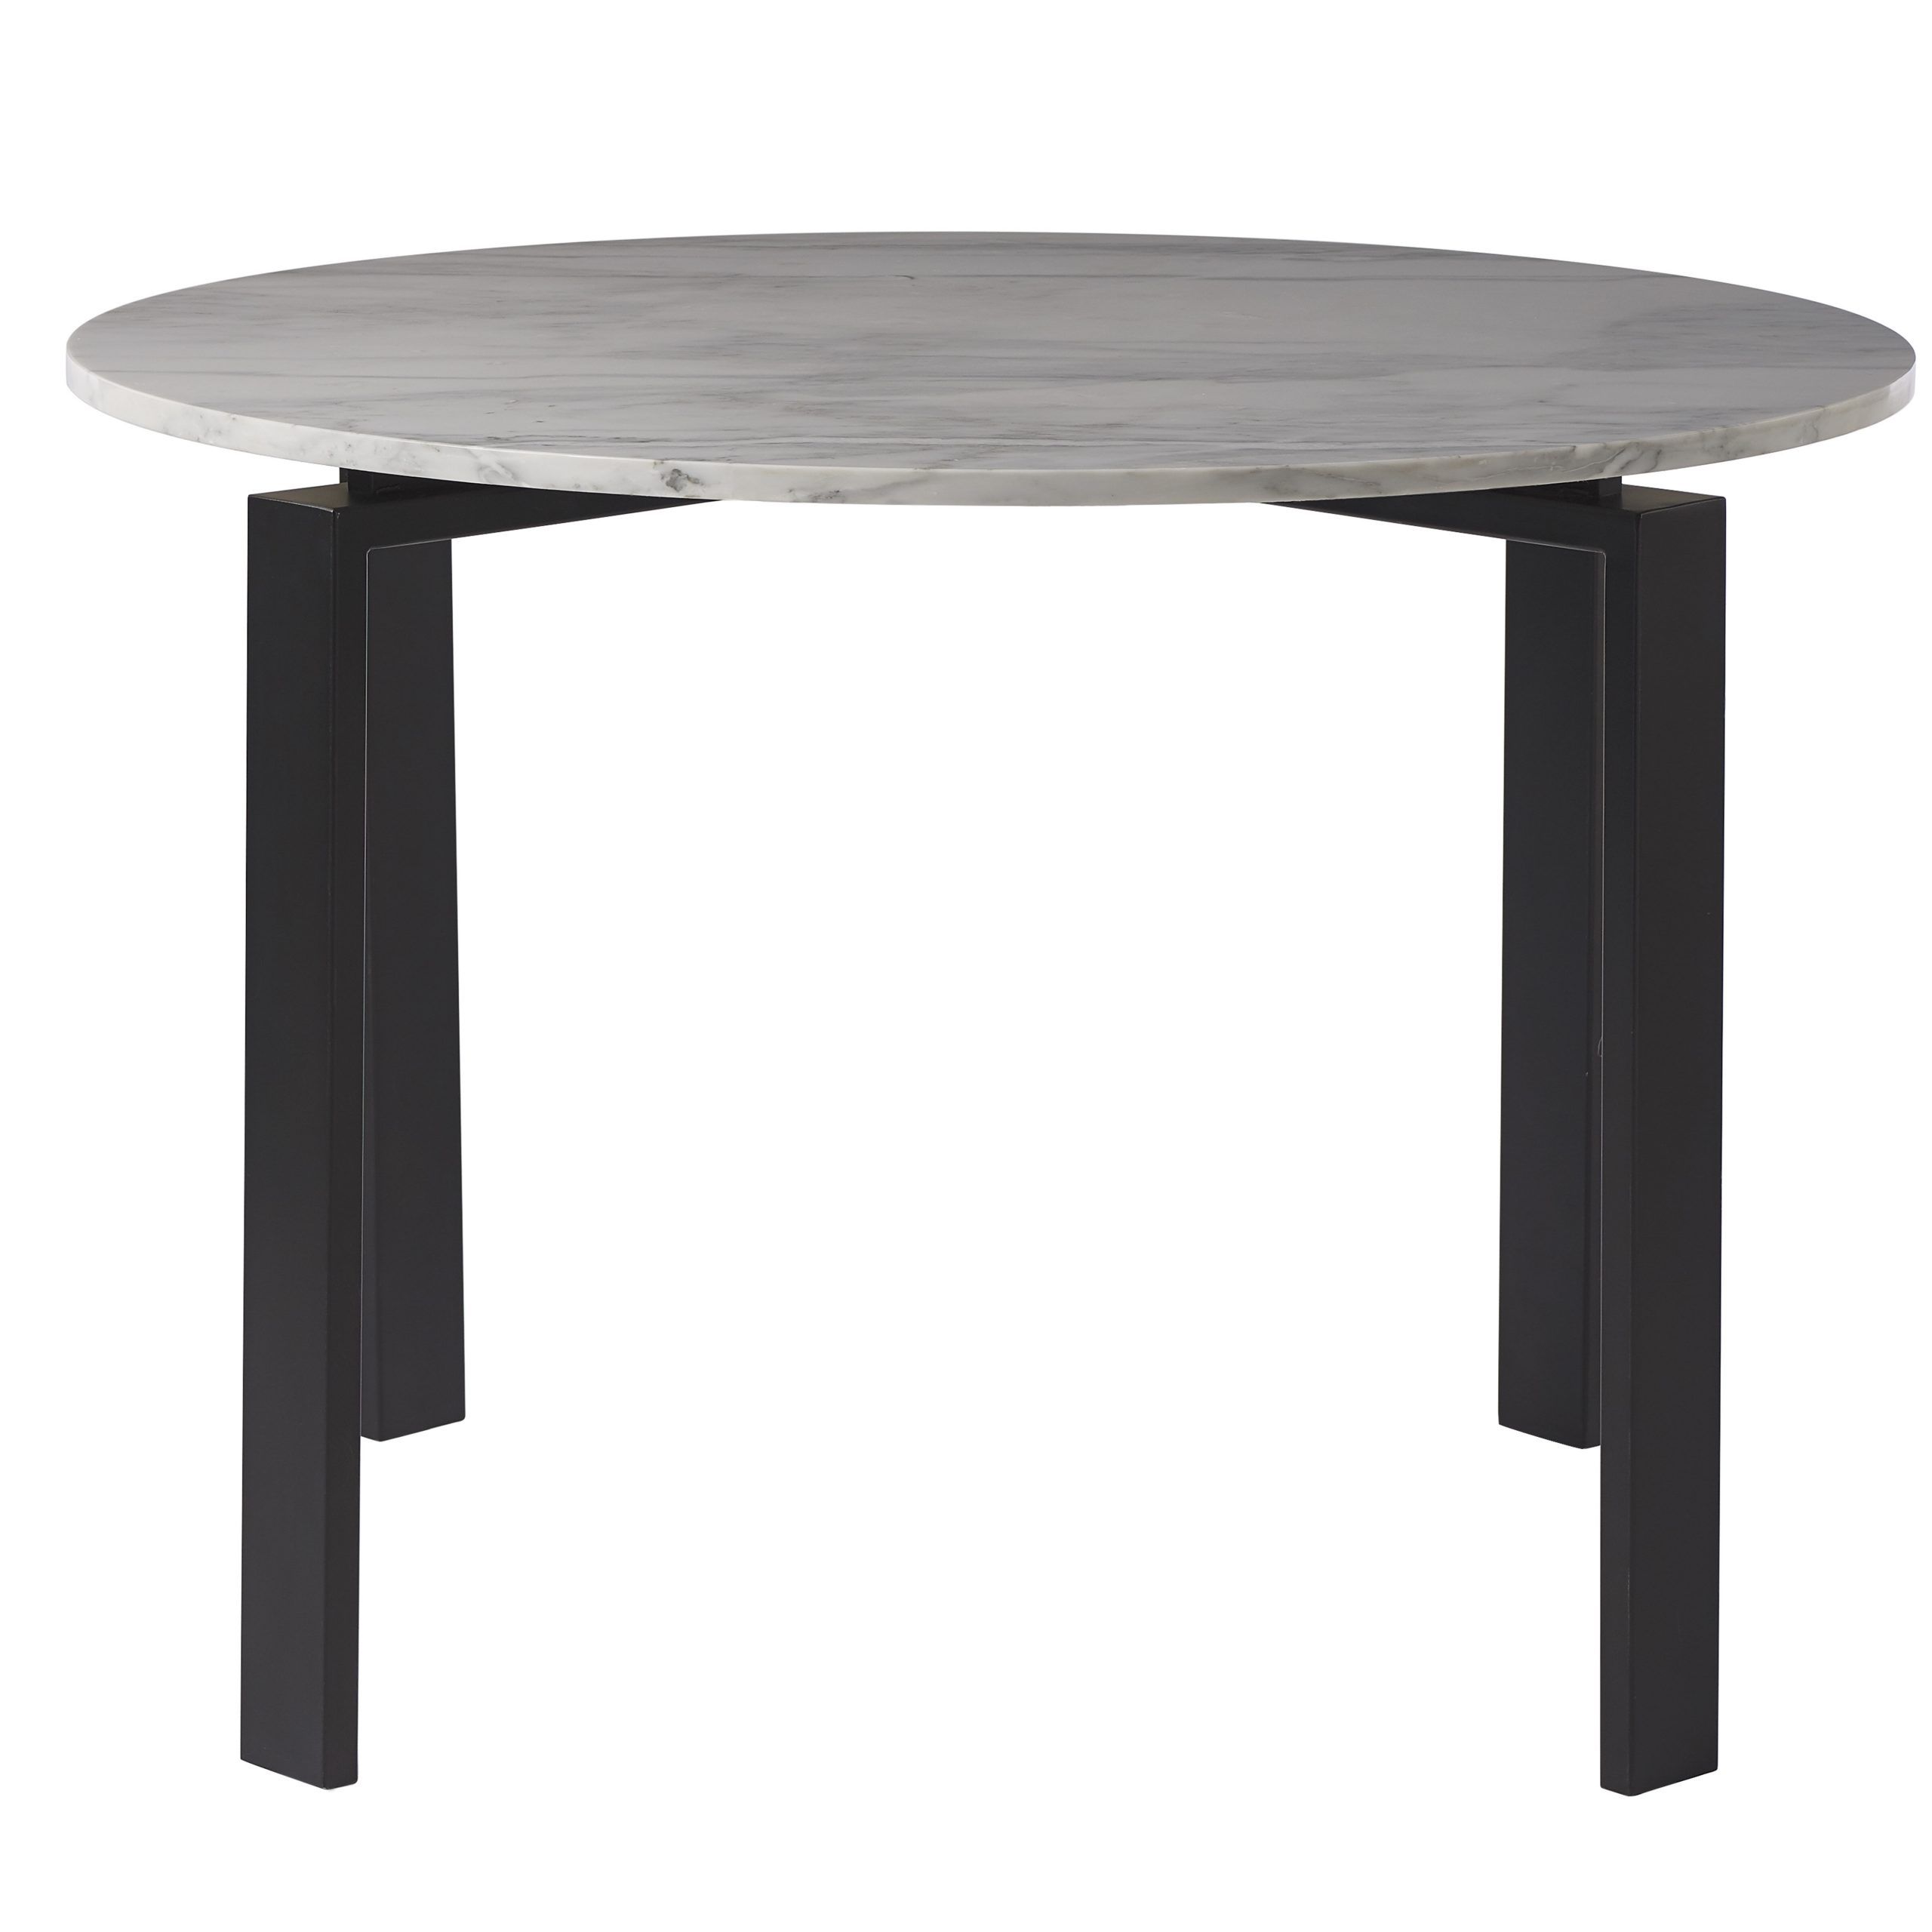 Cleary Oval Dining Pedestal Tables Pertaining To Most Current Beaudette Dining Table (View 12 of 25)